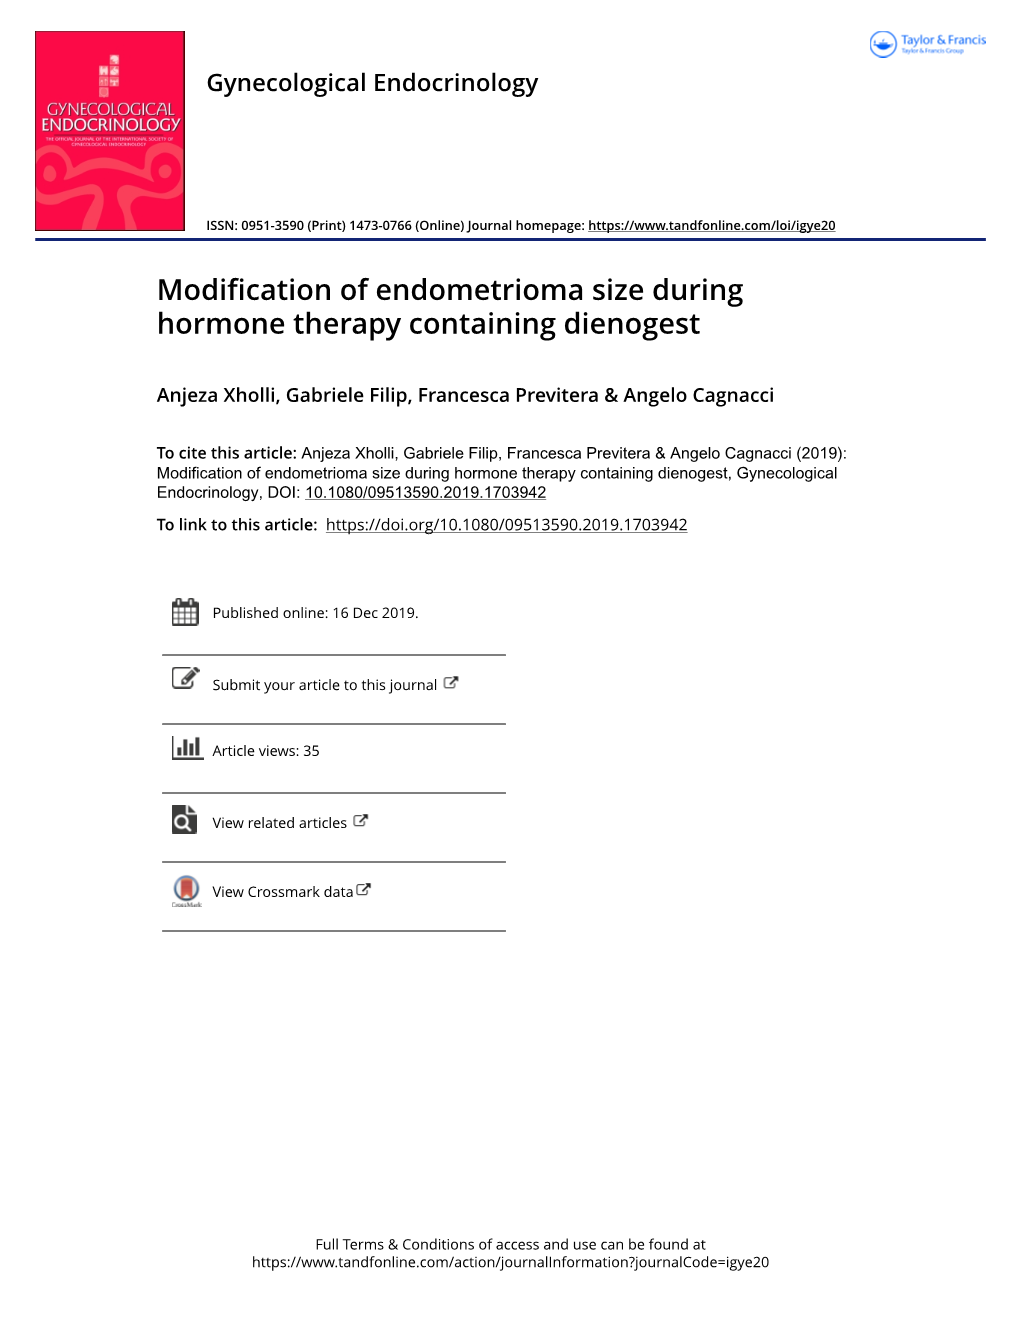 Modification of Endometrioma Size During Hormone Therapy Containing Dienogest